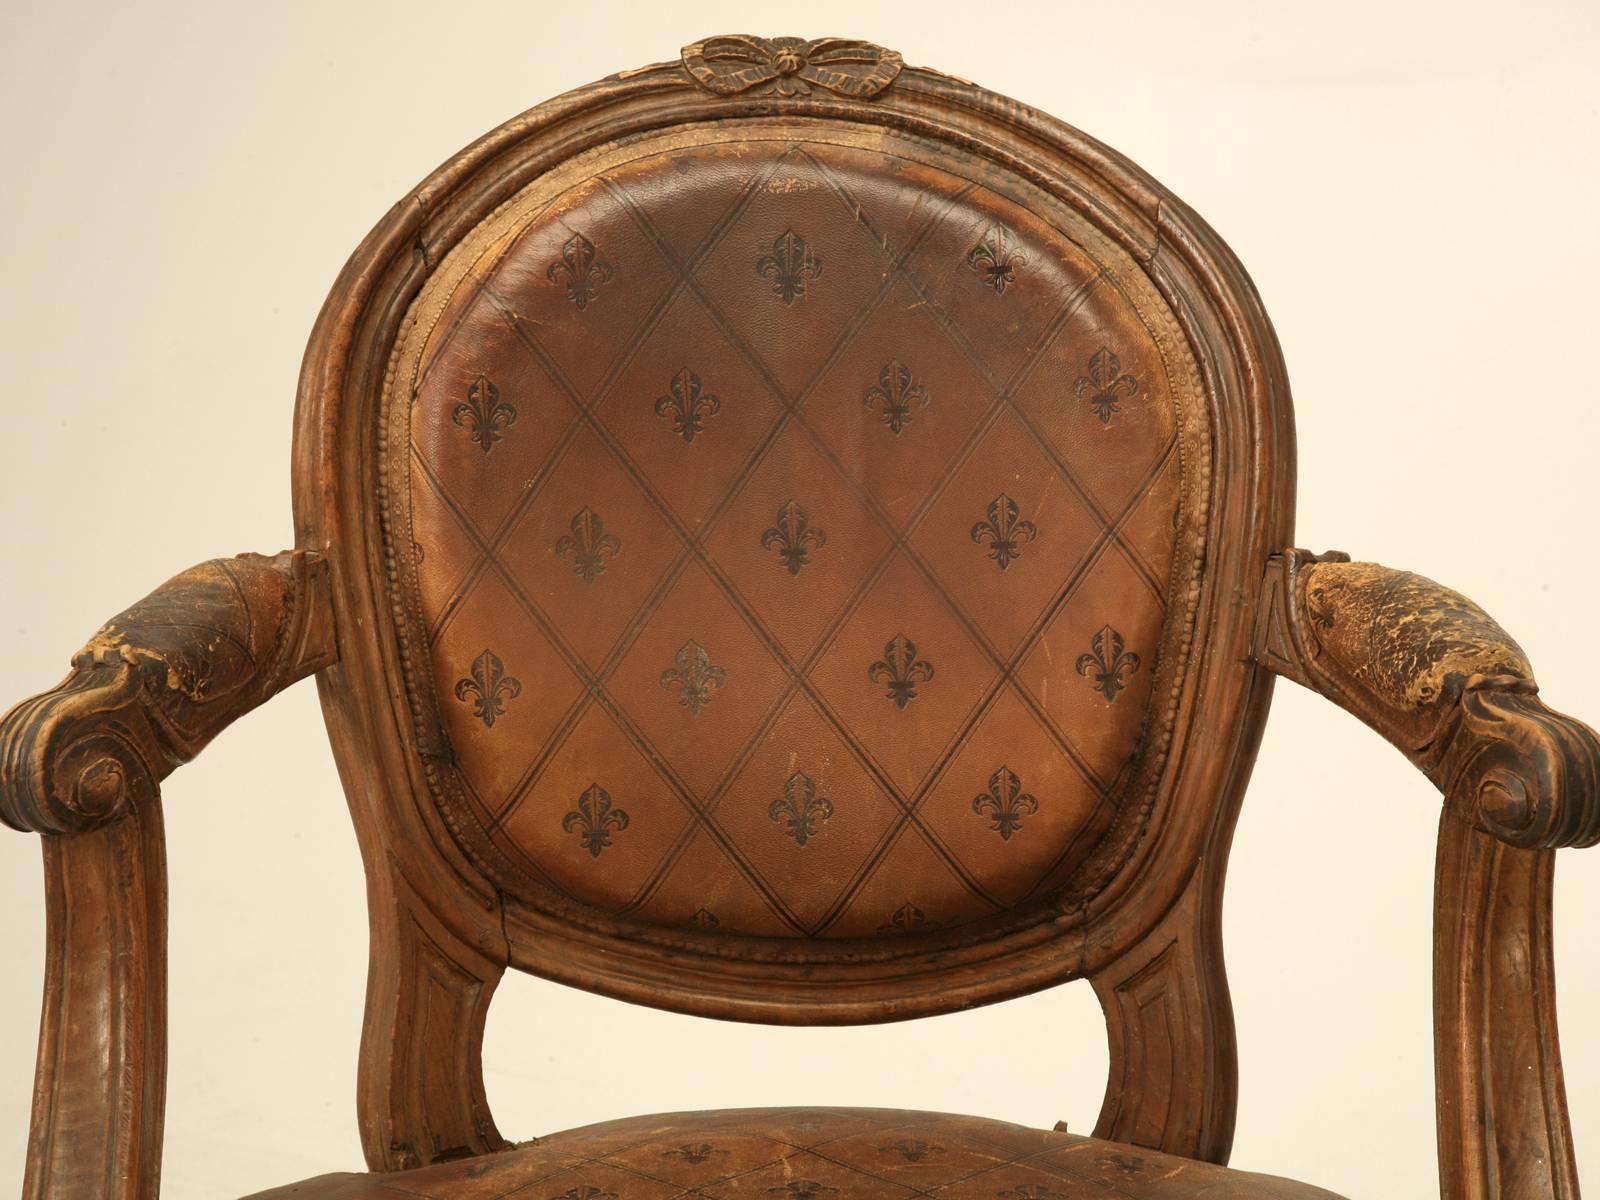 Great pair of very old French Louis XVI Armchairs, in their Original Leather upholstery. Although we do have an in house upholstery department, I have been resisting the temptation to change out the unusual pattern Leather and it is possible to